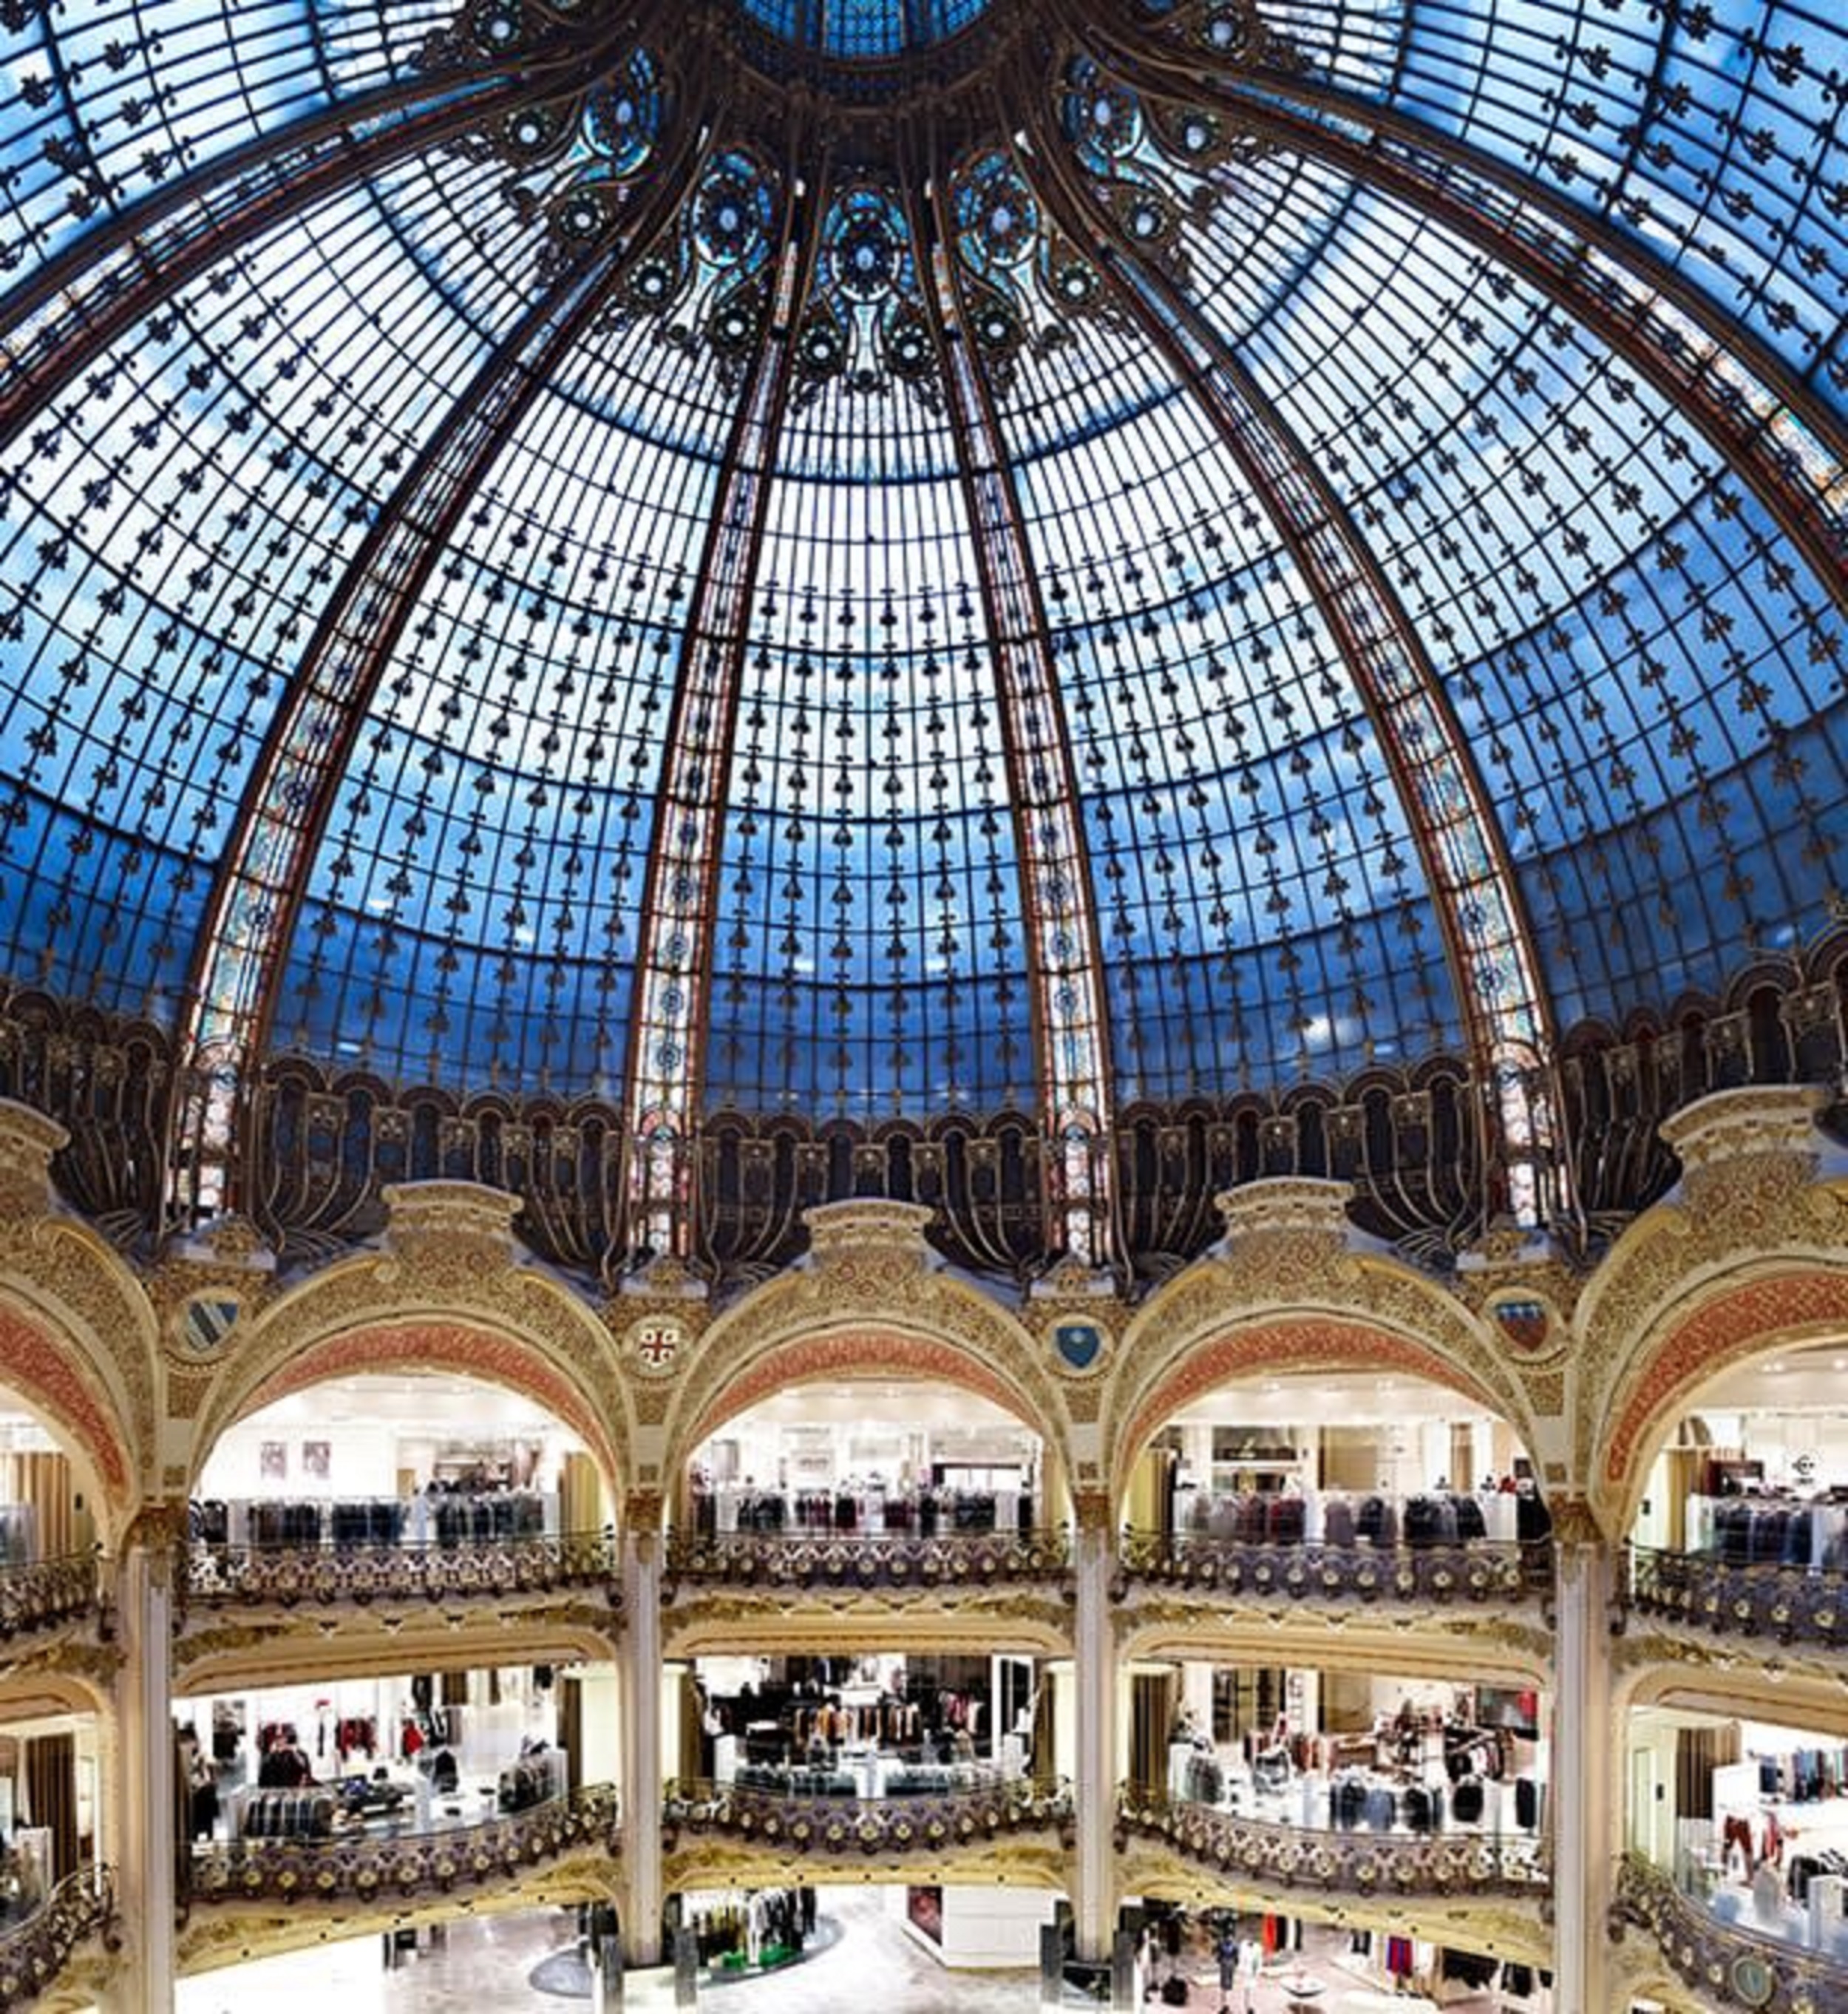 Luxury giant LVMH touts 'excellent' first quarter